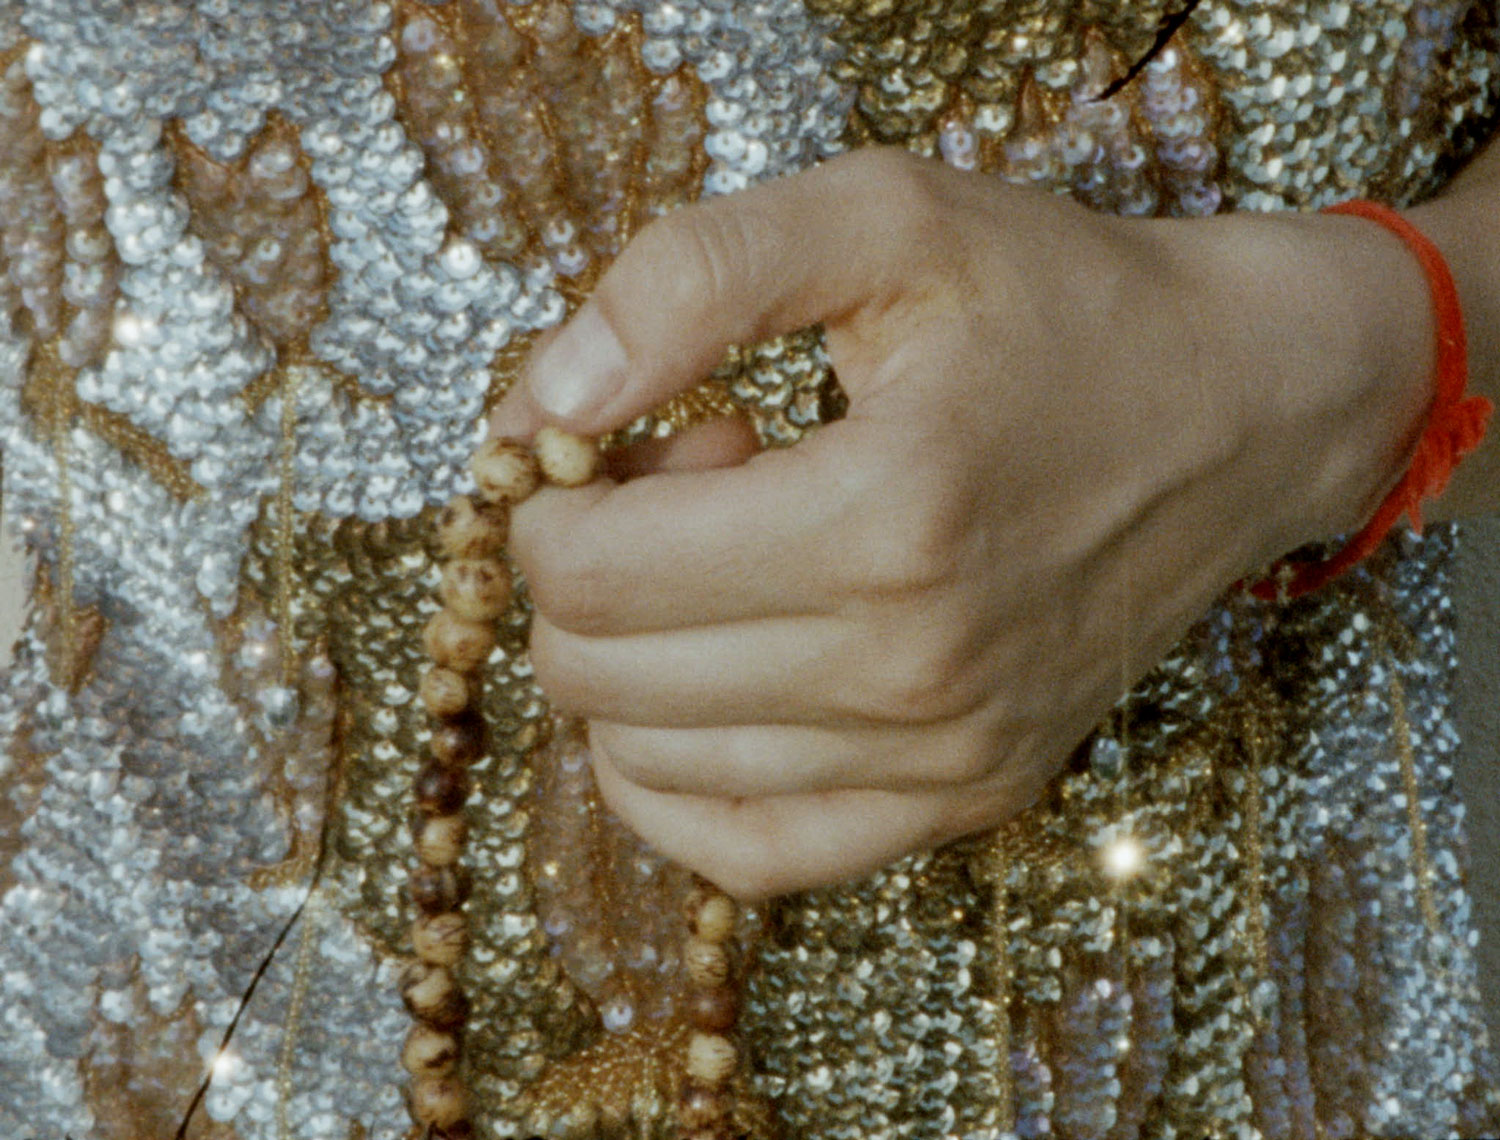 16mm film still: a closeup of a hand telling the beads of a rosary